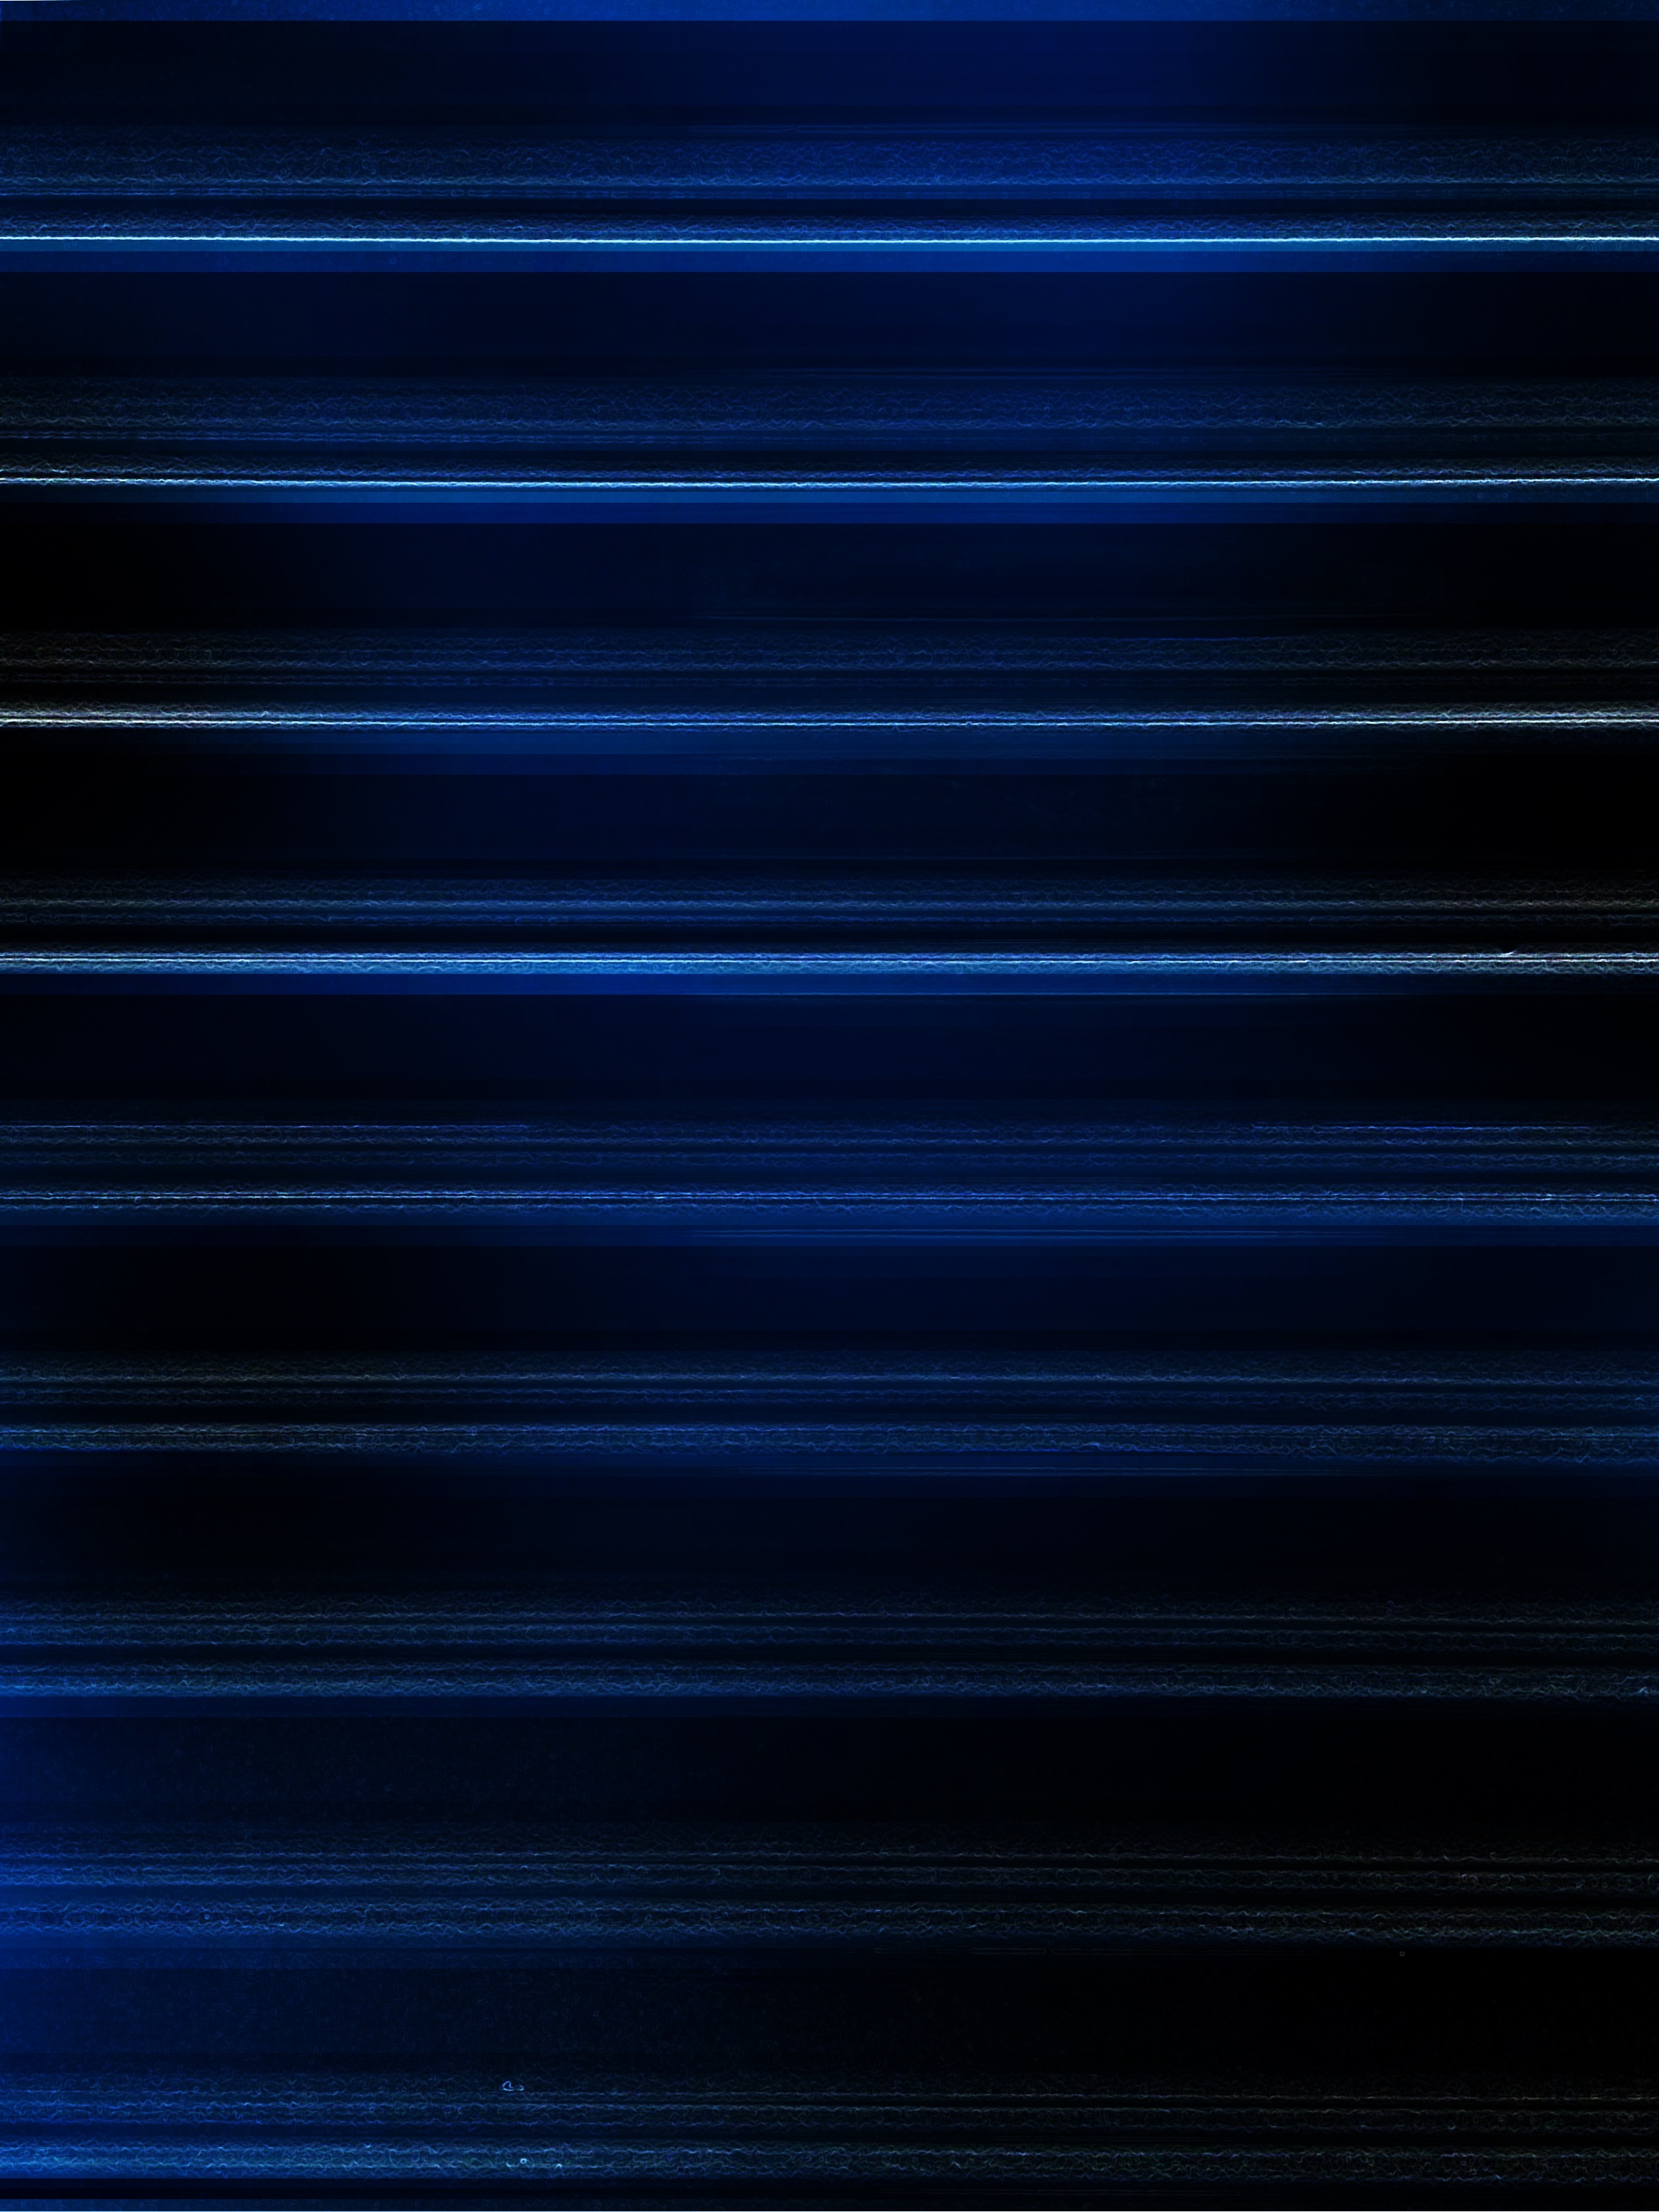 122375 Screensavers and Wallpapers Vertical for phone. Download textures, blue, dark, texture, lines, stripes, streaks, vertical pictures for free